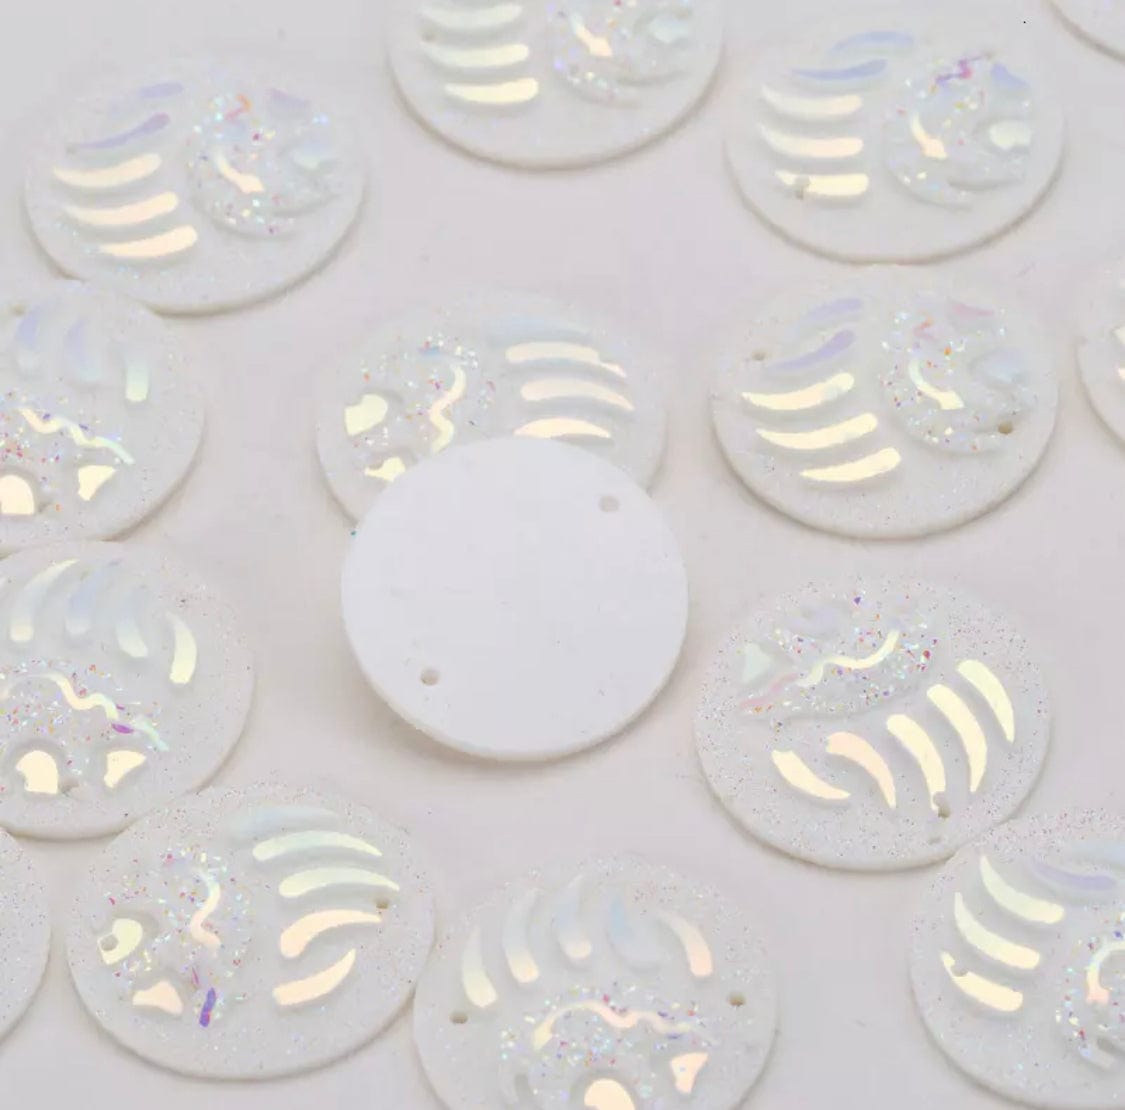 Sundaylace Creations & Bling Resin Gems White AB 25mm Bear CLAW PAW print, *New in AB and Metallic Finish Circle/Round, Sew on, Resin Gem (Sold in Pair)